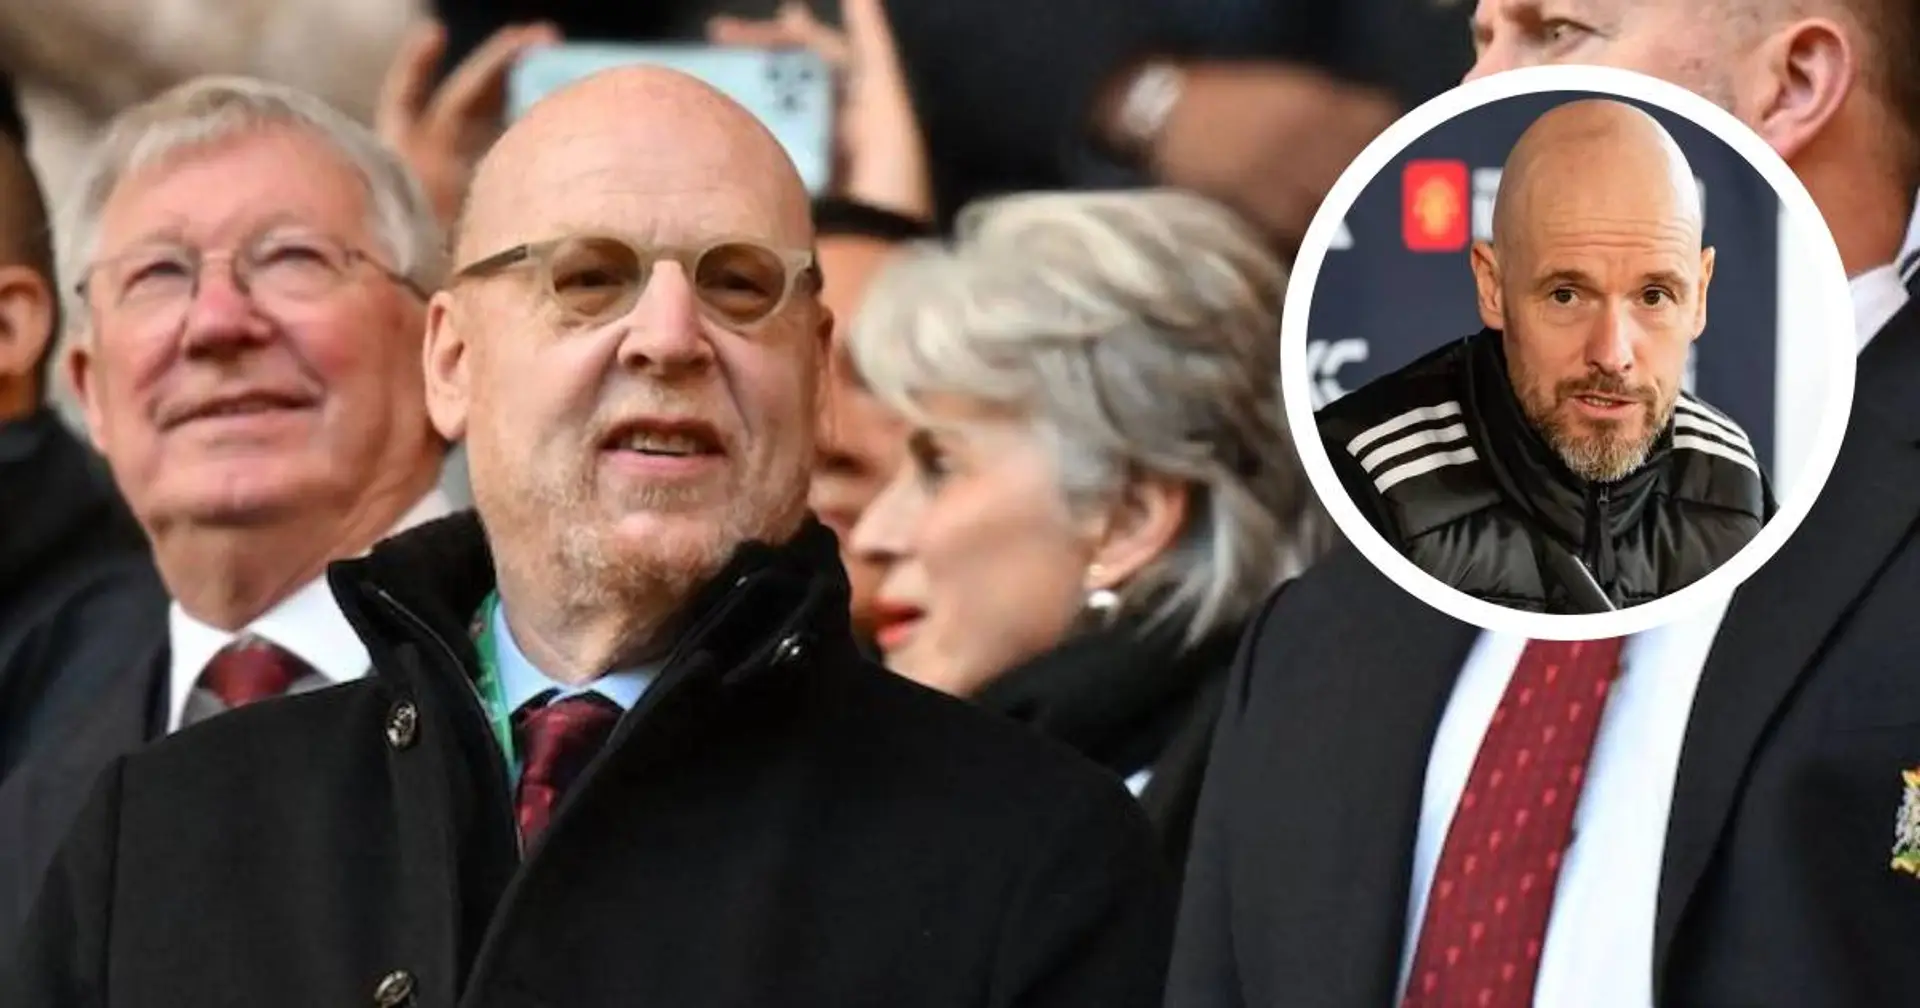 'We missed 2 windows': Erik ten Hag takes dig at Glazers over lack of transfers